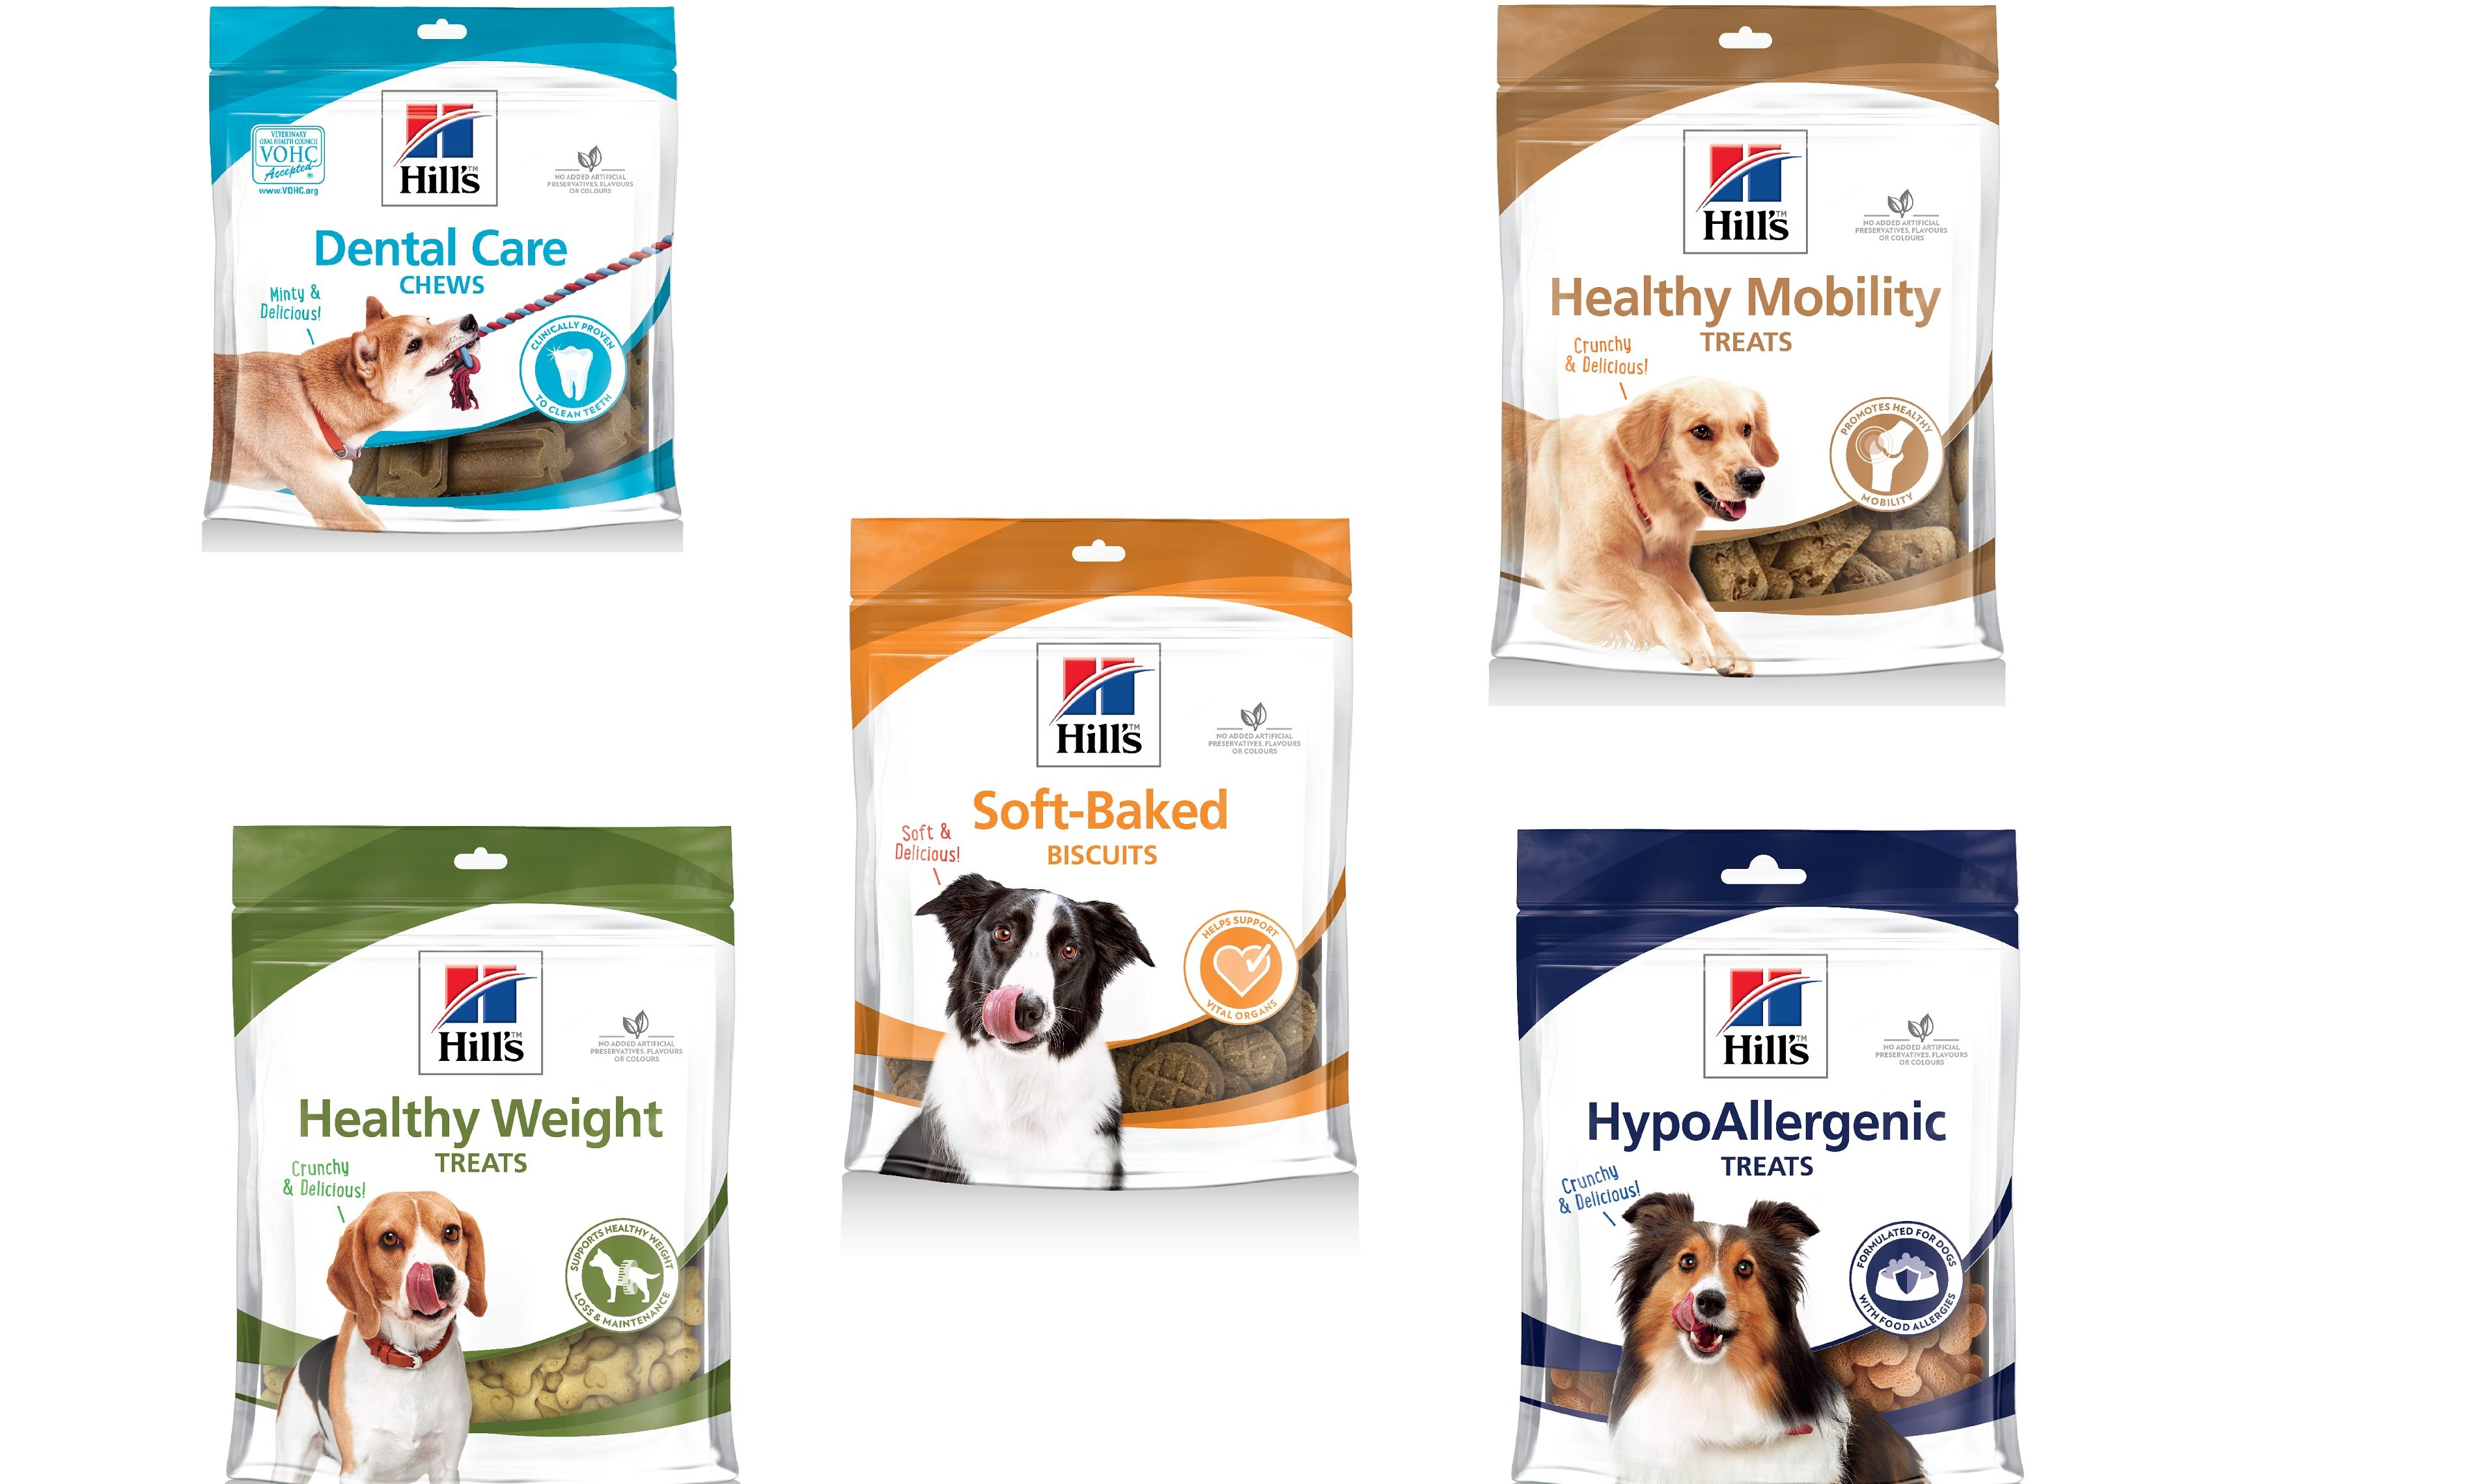 hill's hypoallergenic treats for dogs